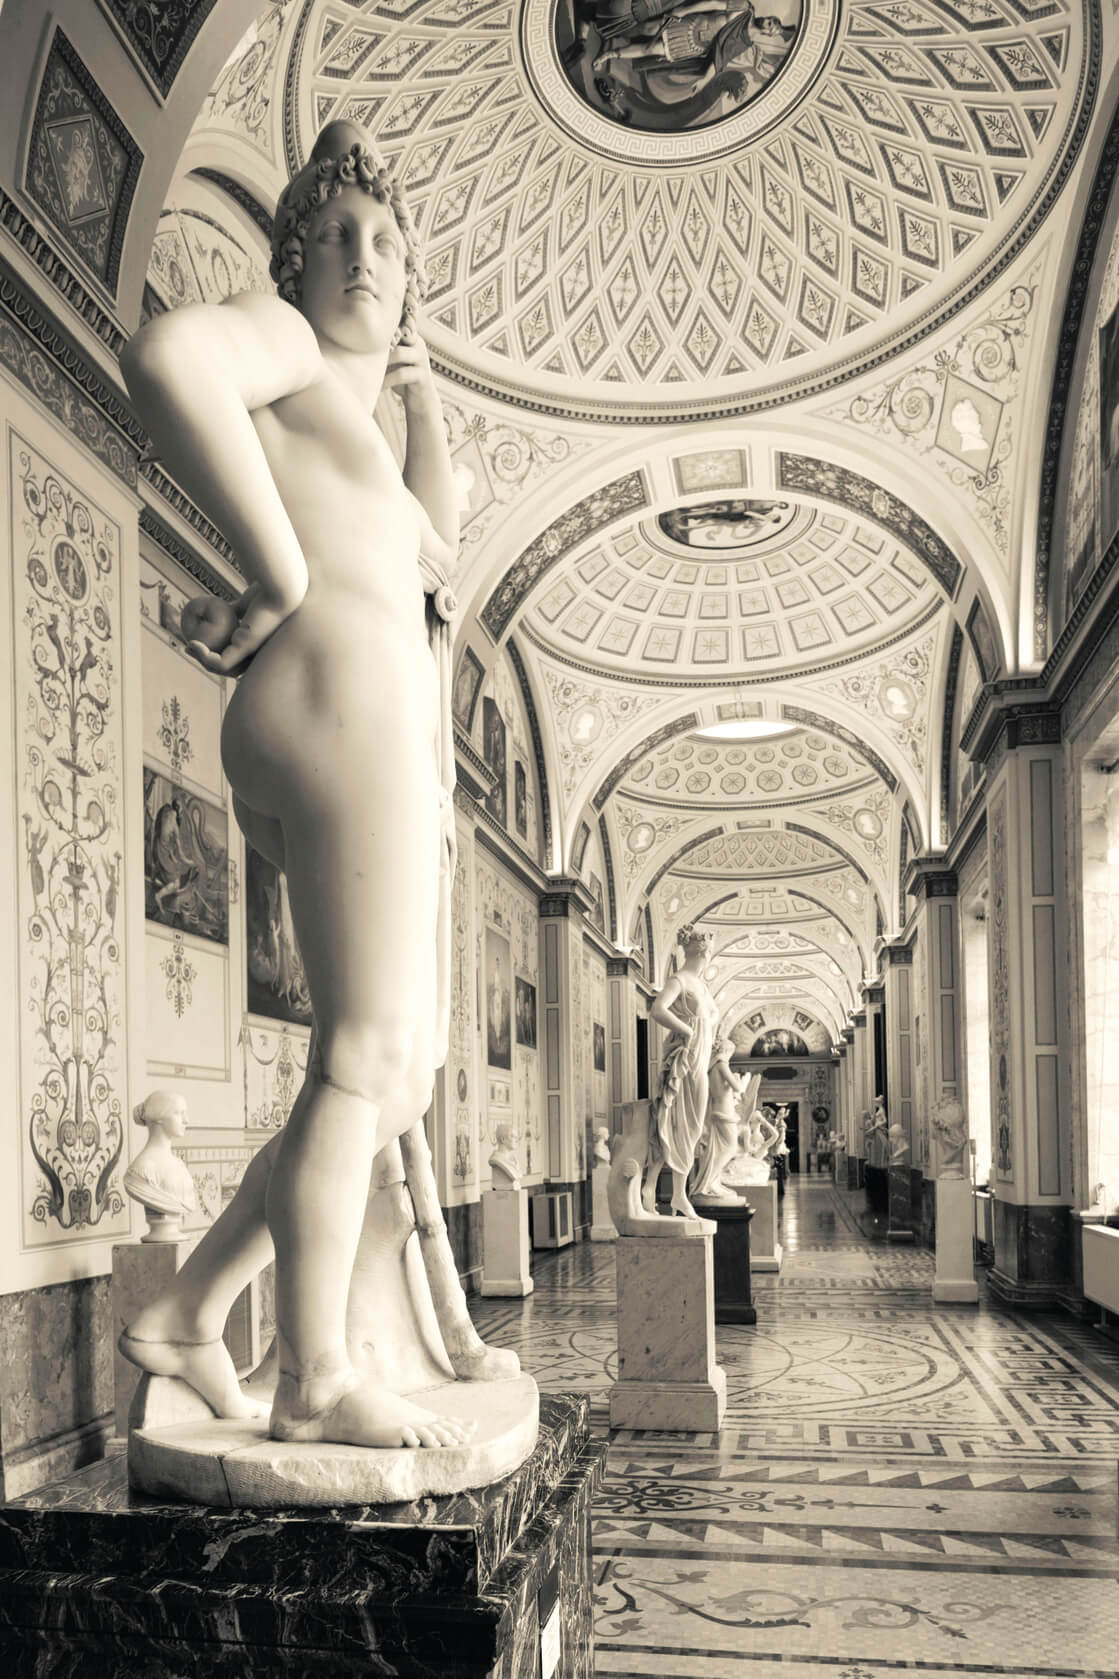 A hallway of statues of Catherine the great